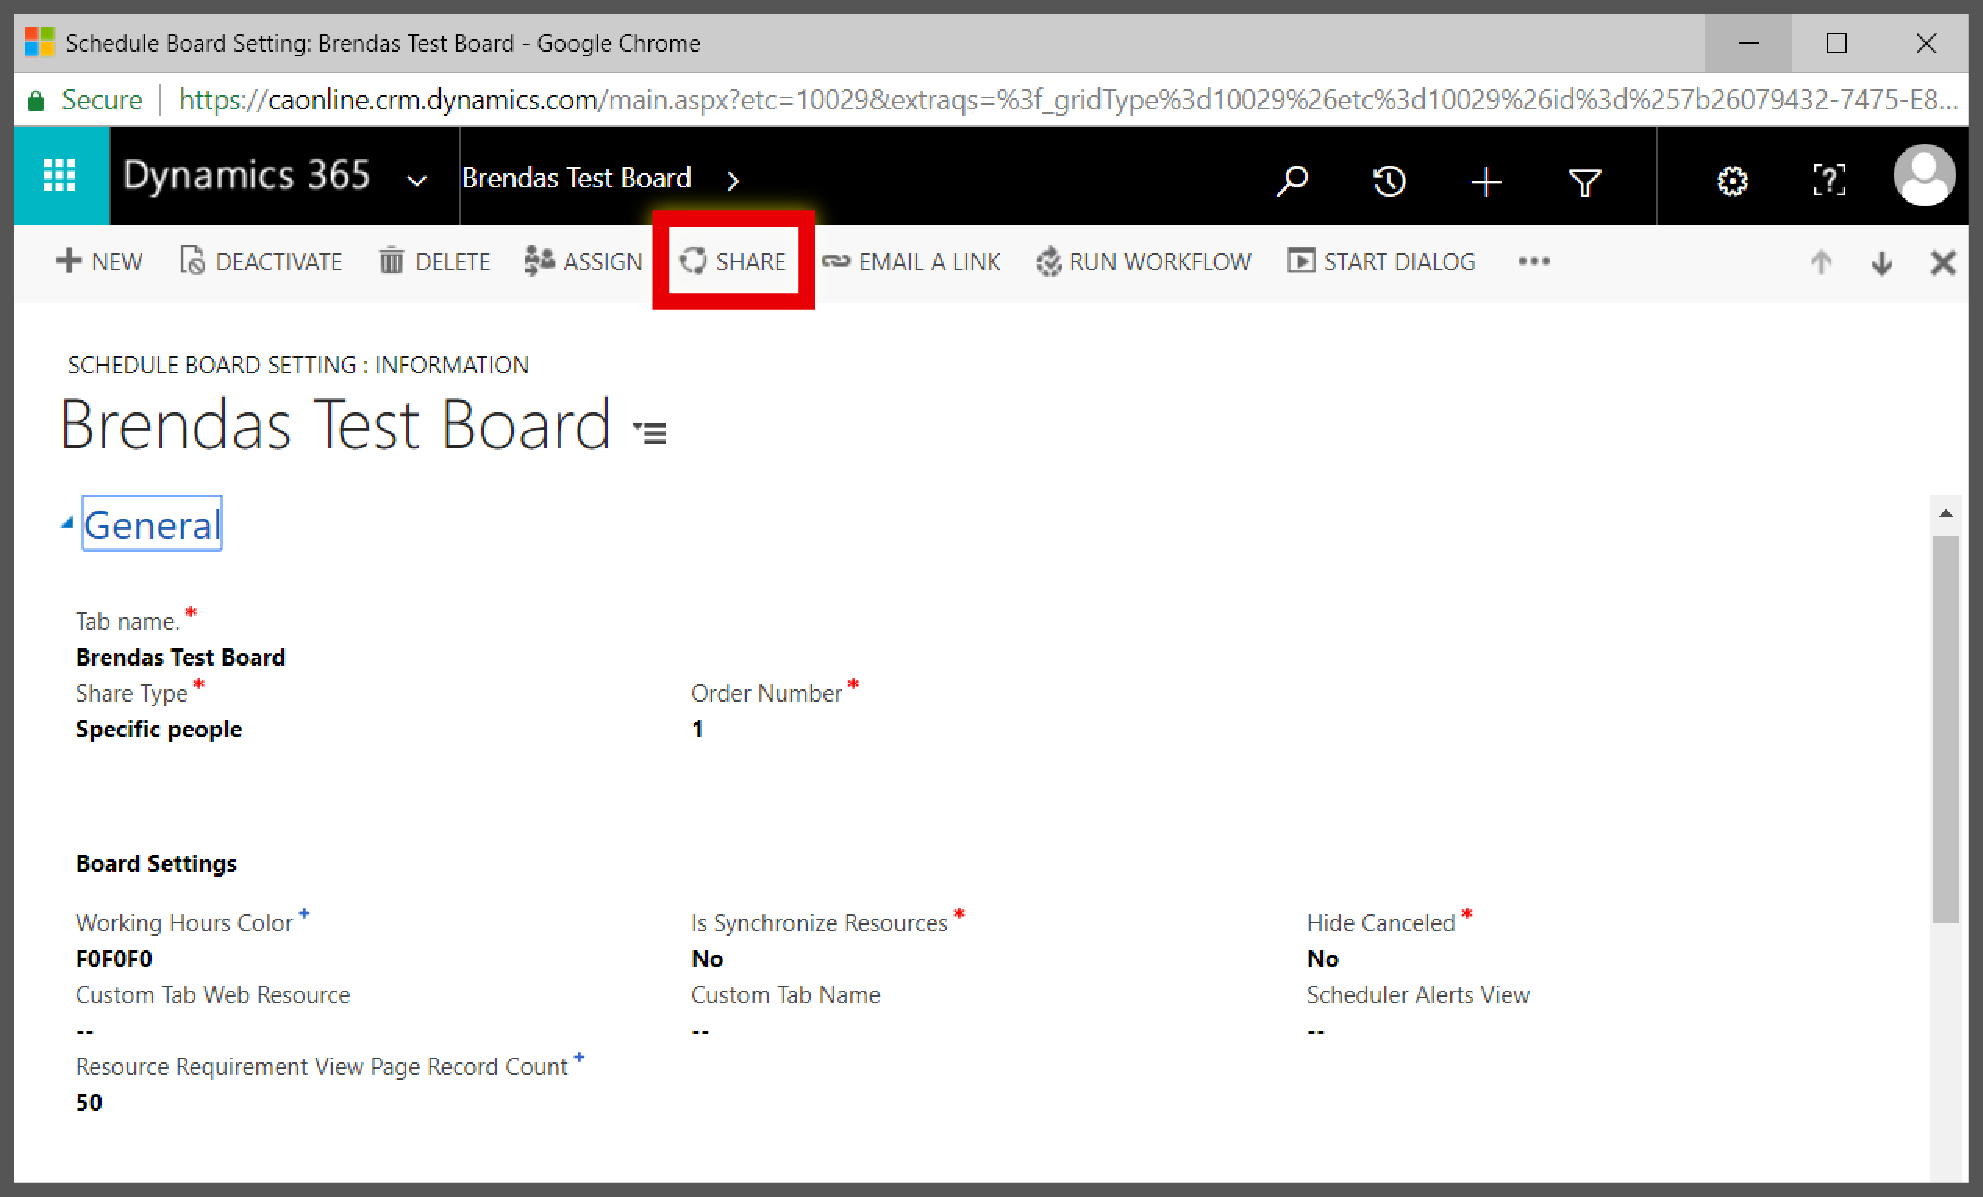 Field Service Schedule in Dynamics 365 for Sales (CRM)